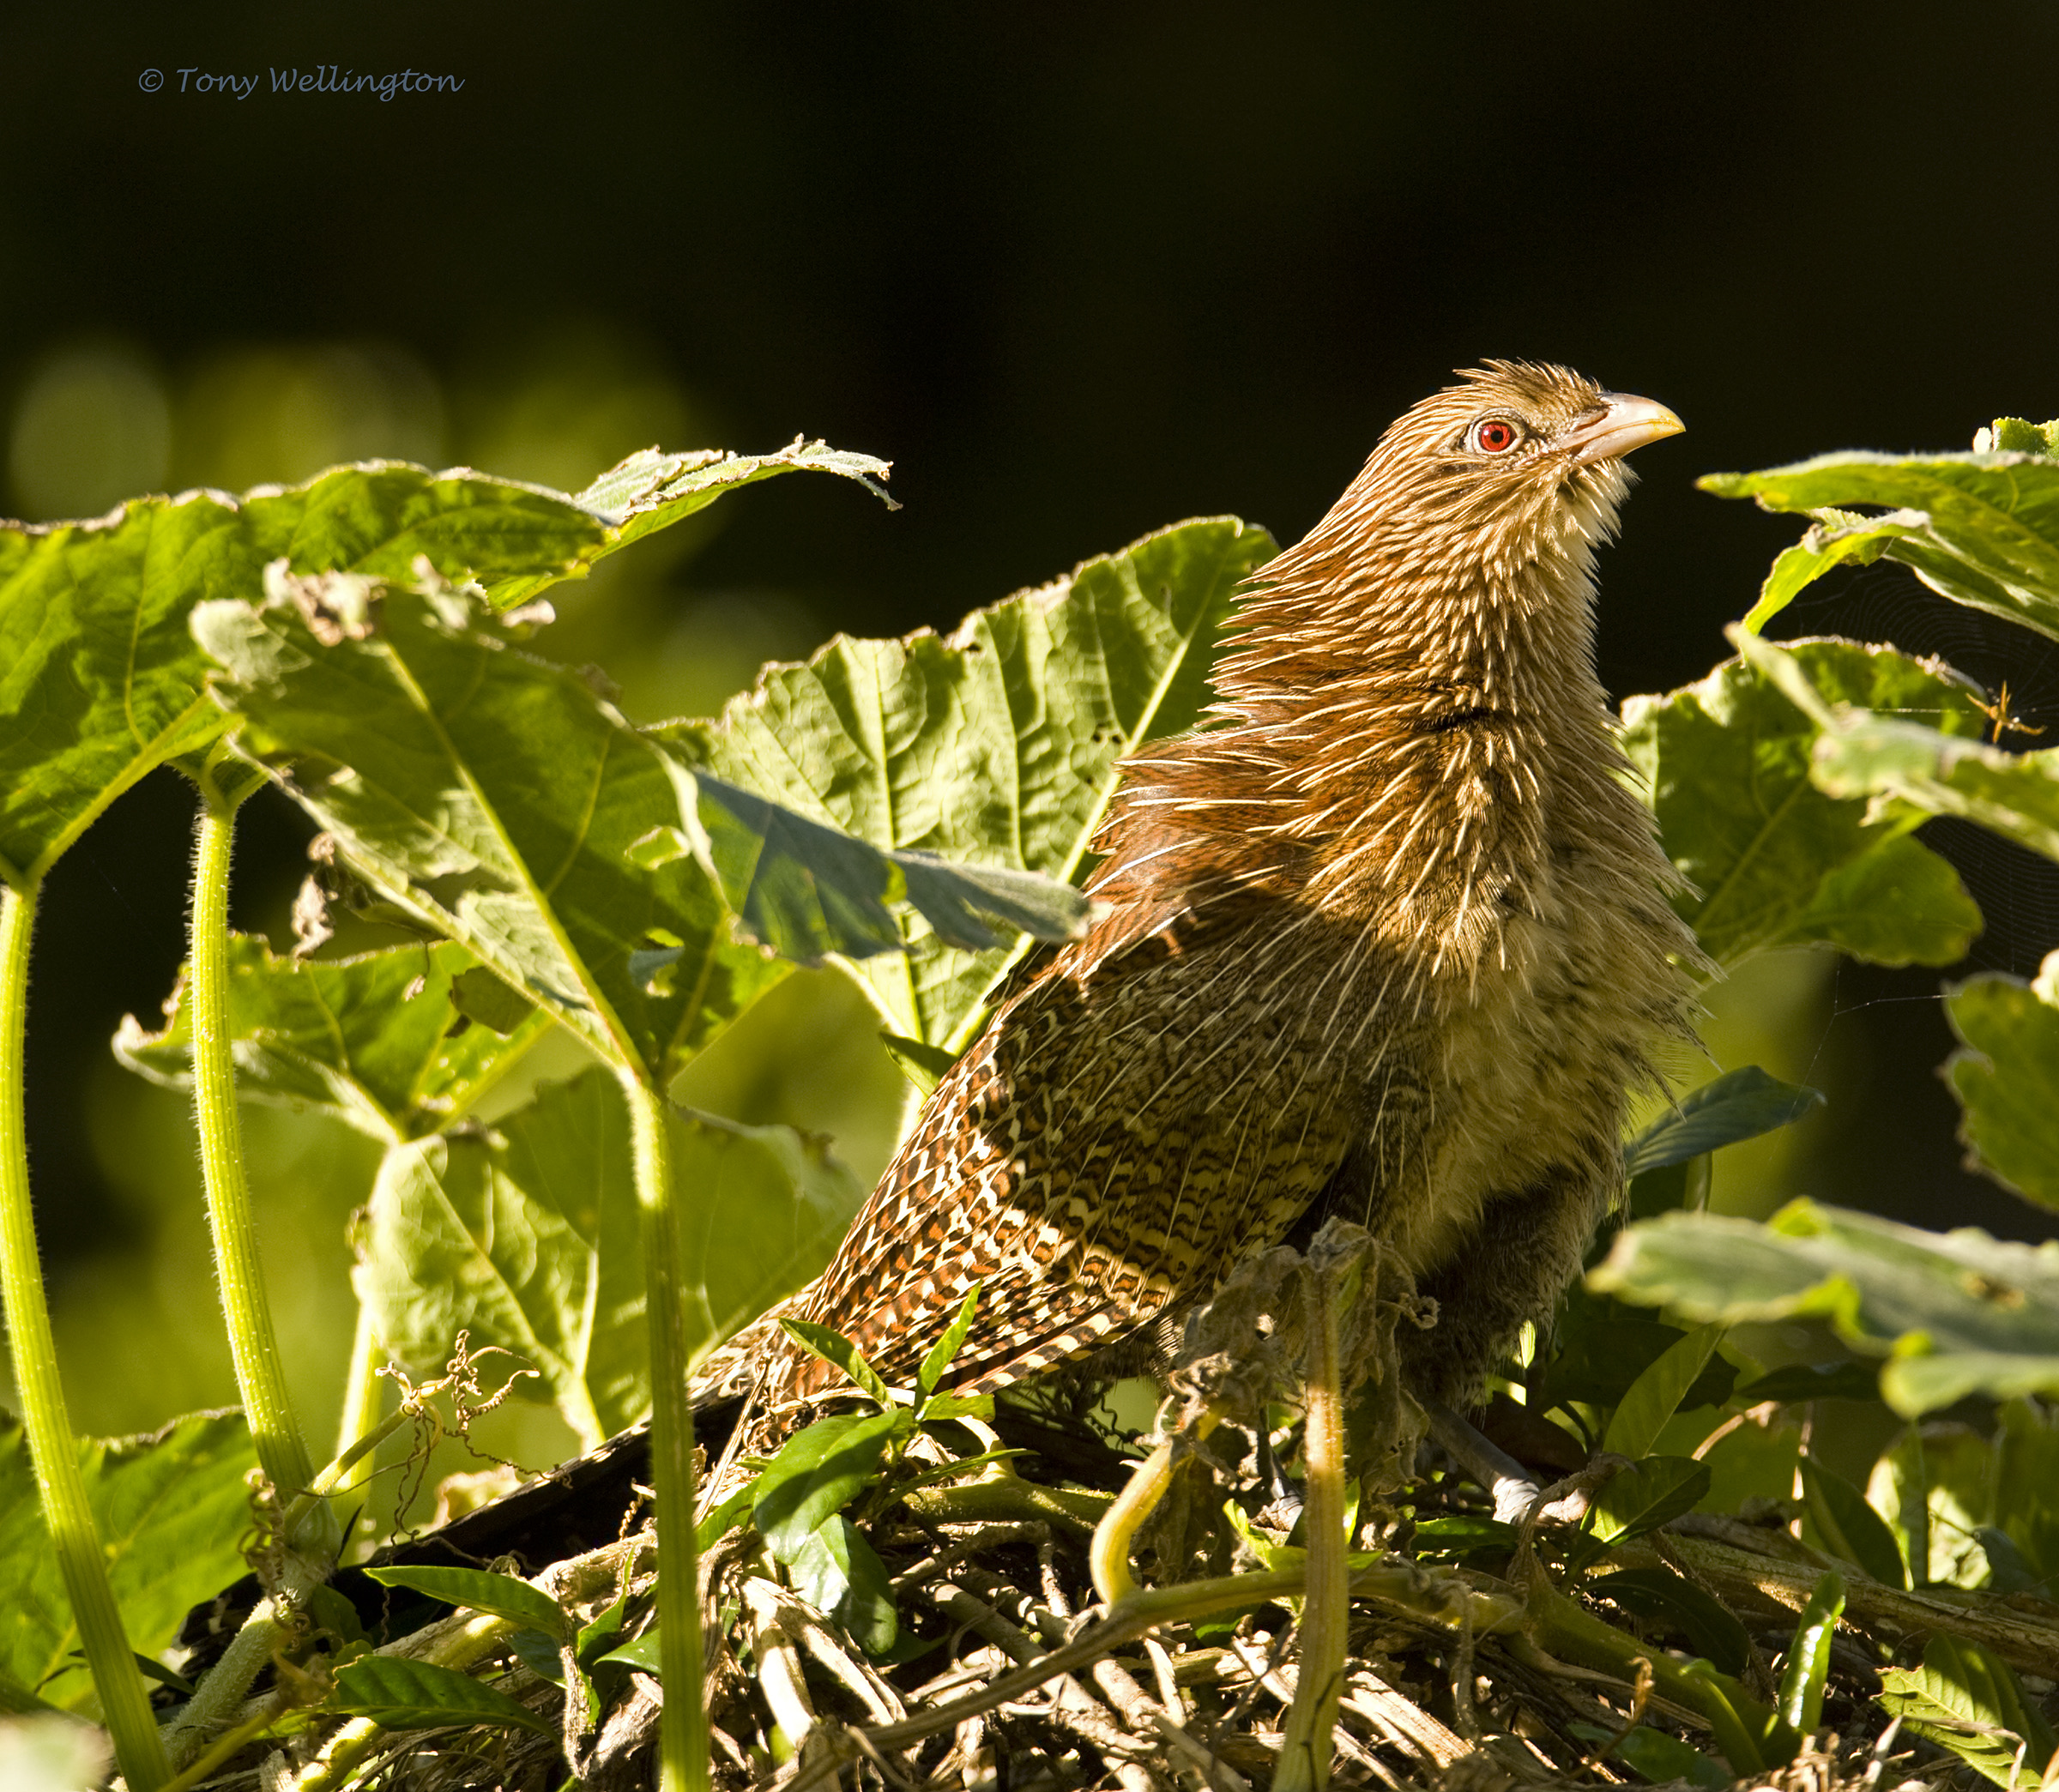 The Pheasant Coucal is familiar to many in 4562